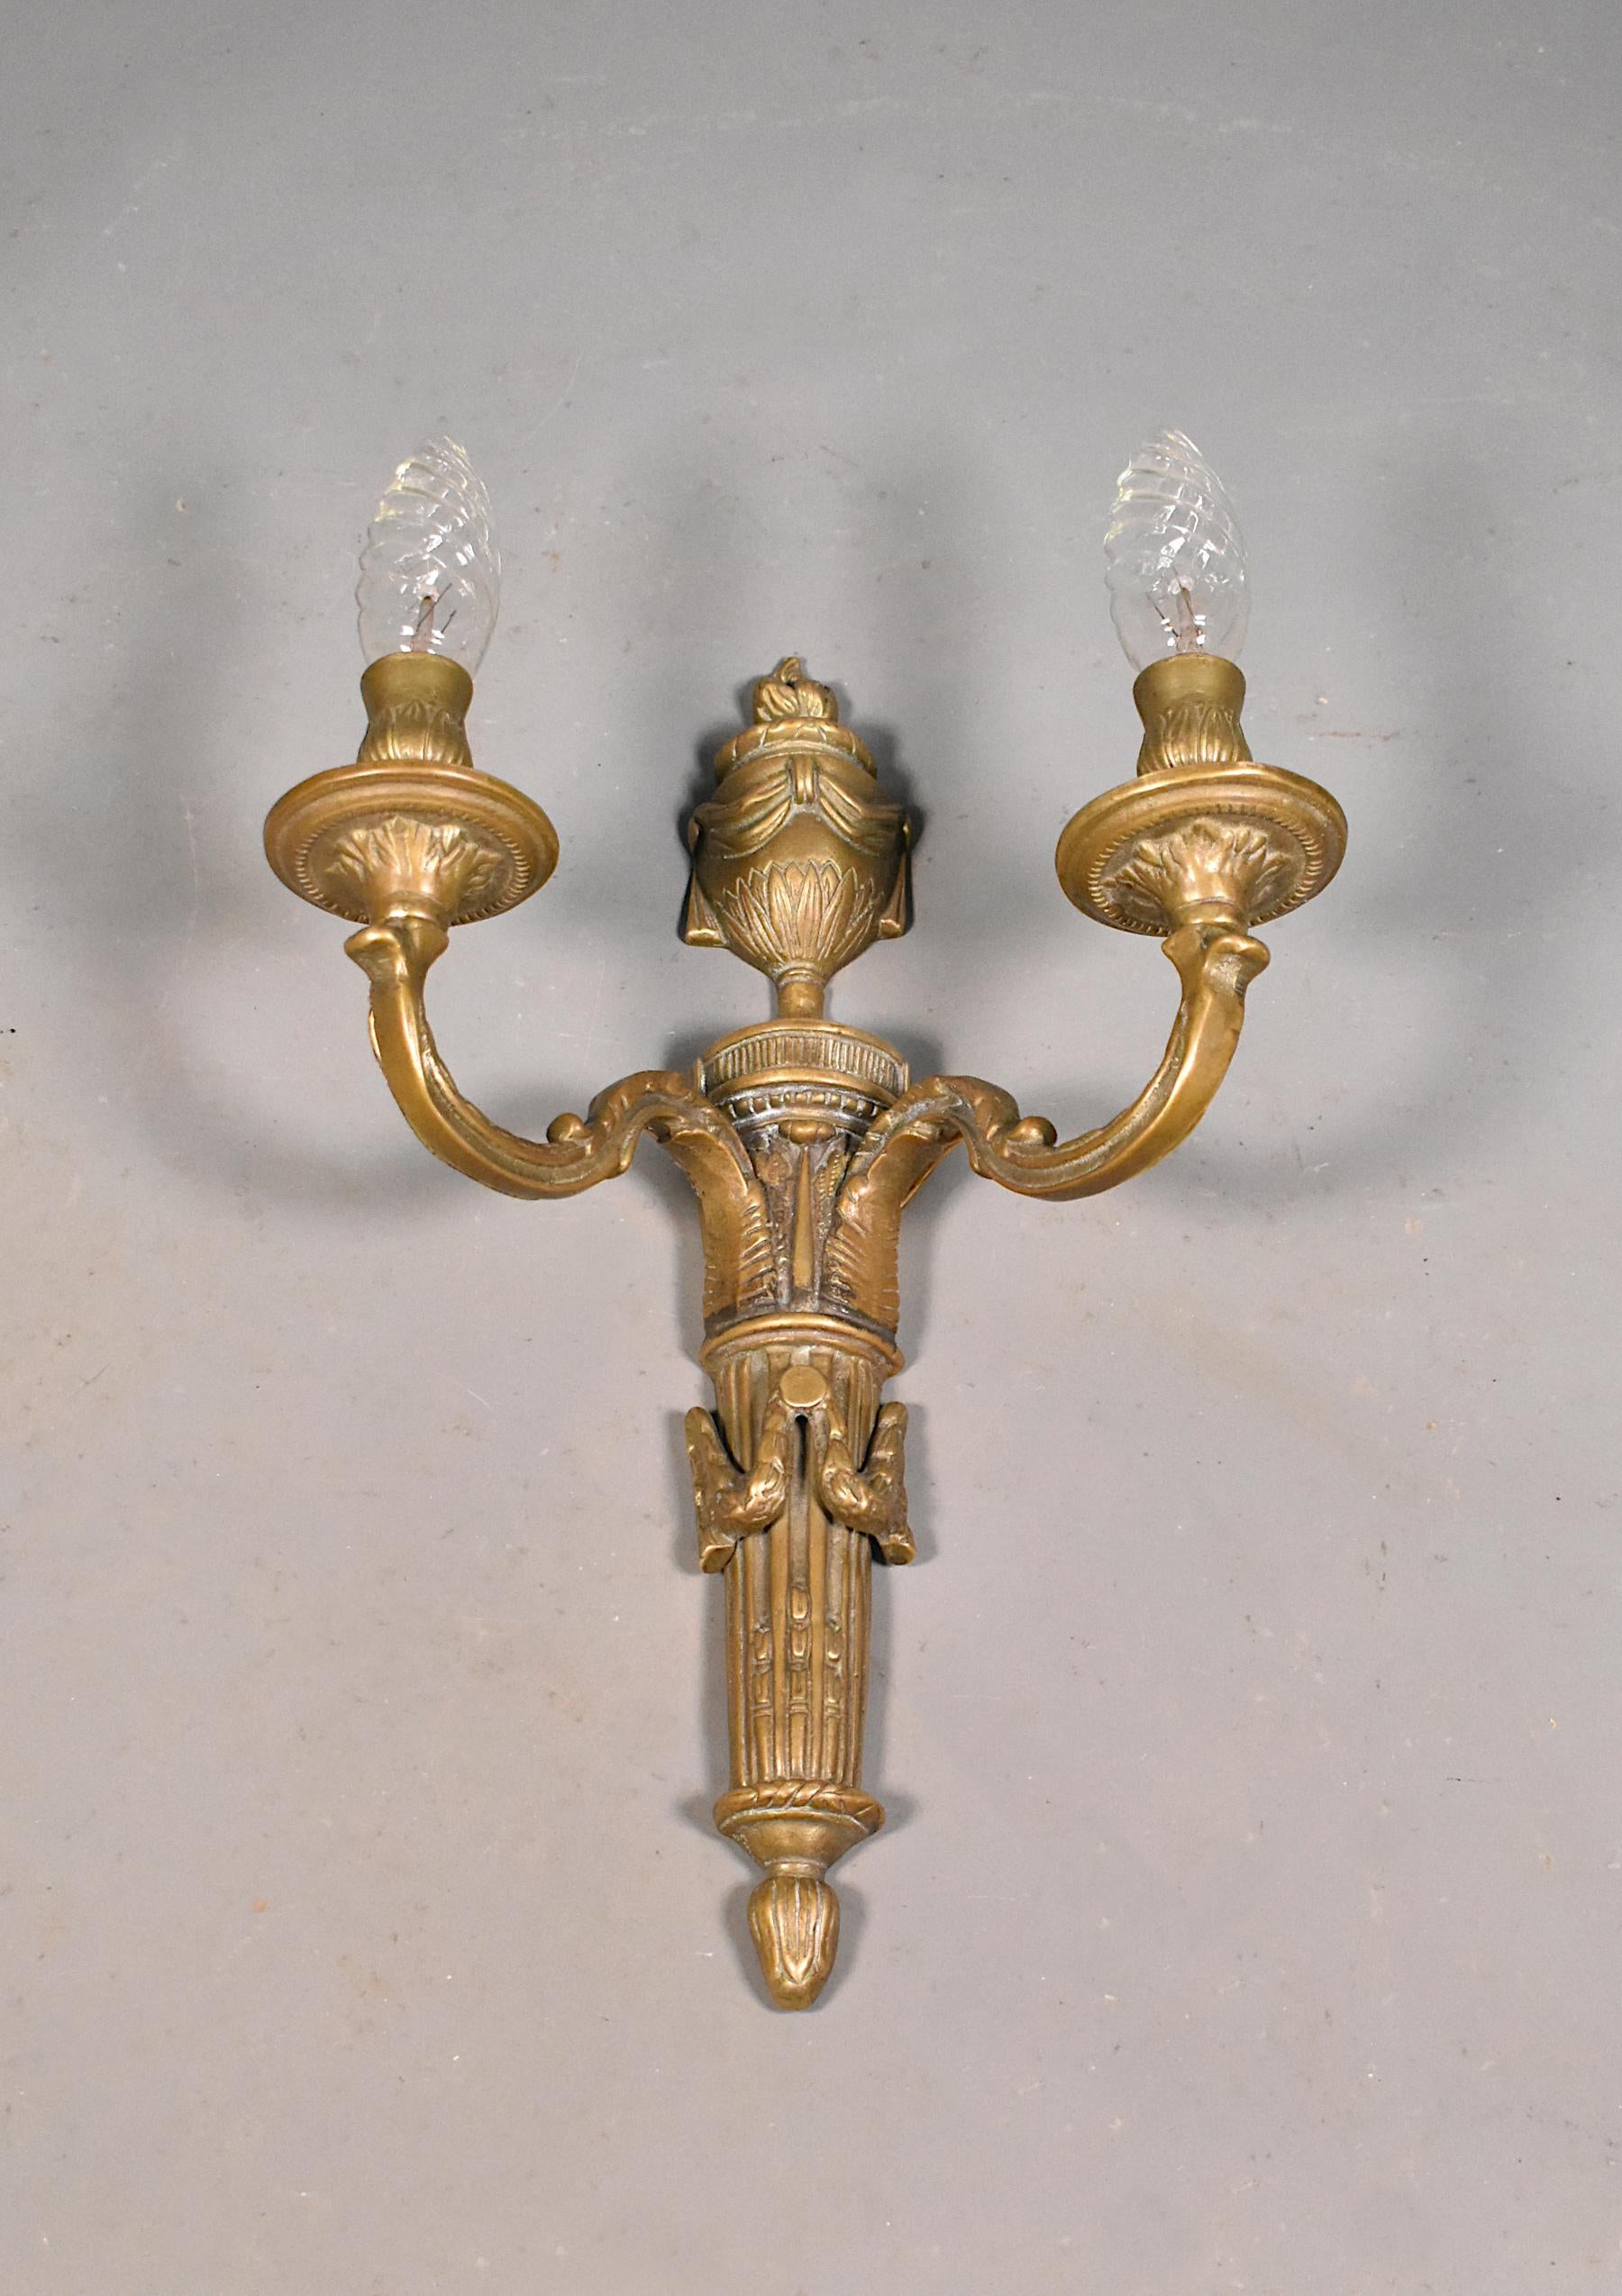 Large antique French bronze wall sconce Napoleon III (19th Century).

This large decorative wall sconce in bronze features out-swept arms with floral detail. The arms support two decorative candle lights. 

To the top is an urn draped in swags